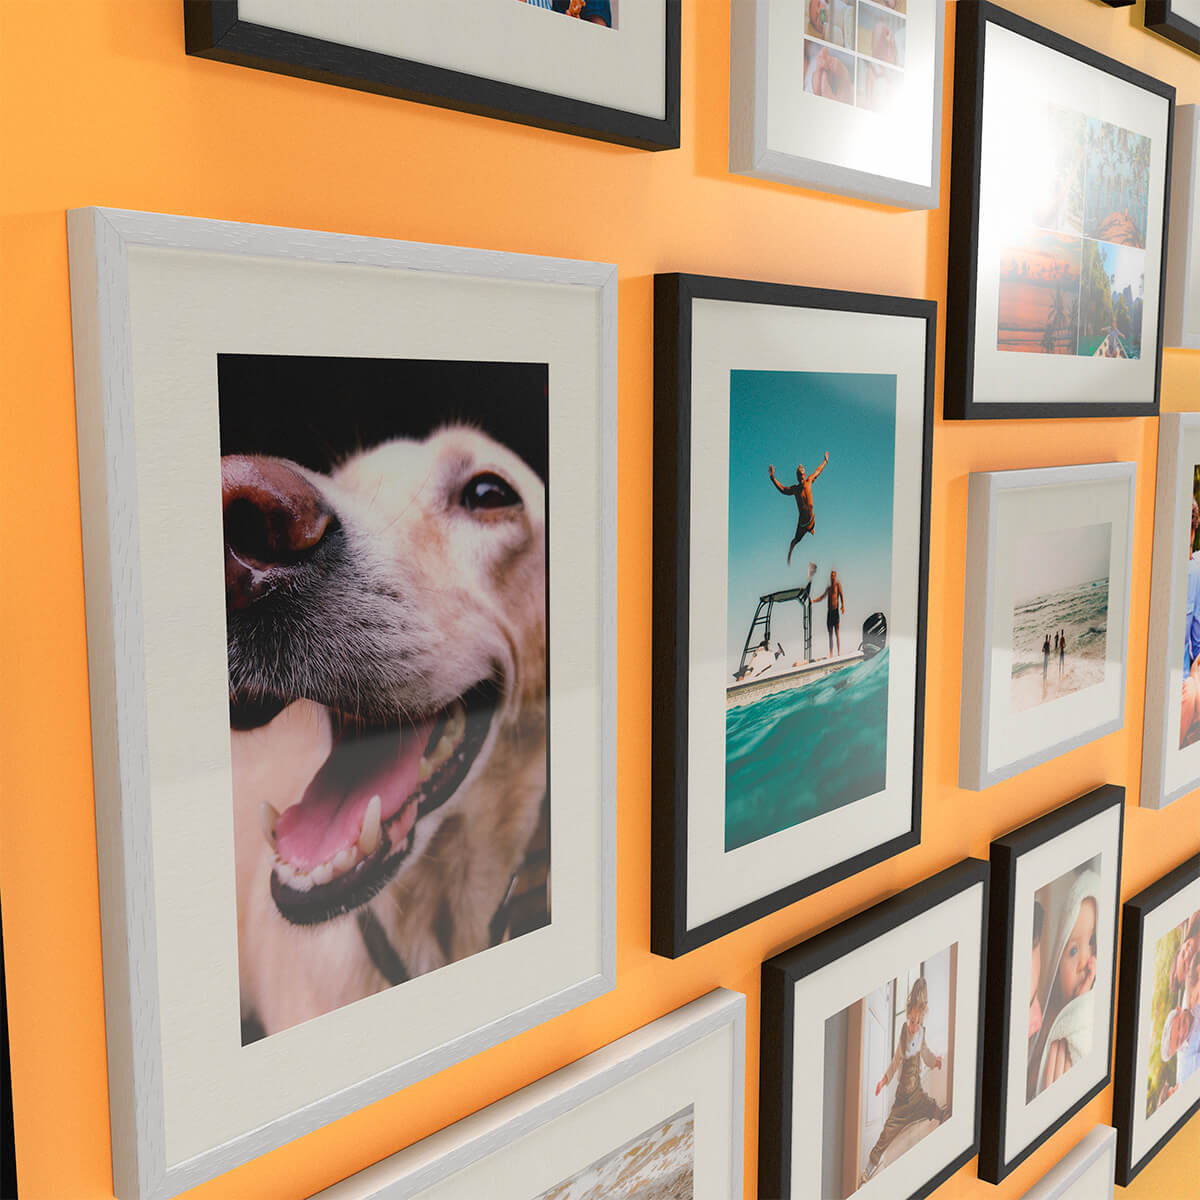 A size comparison of six different premium photo frames mounted on the wall